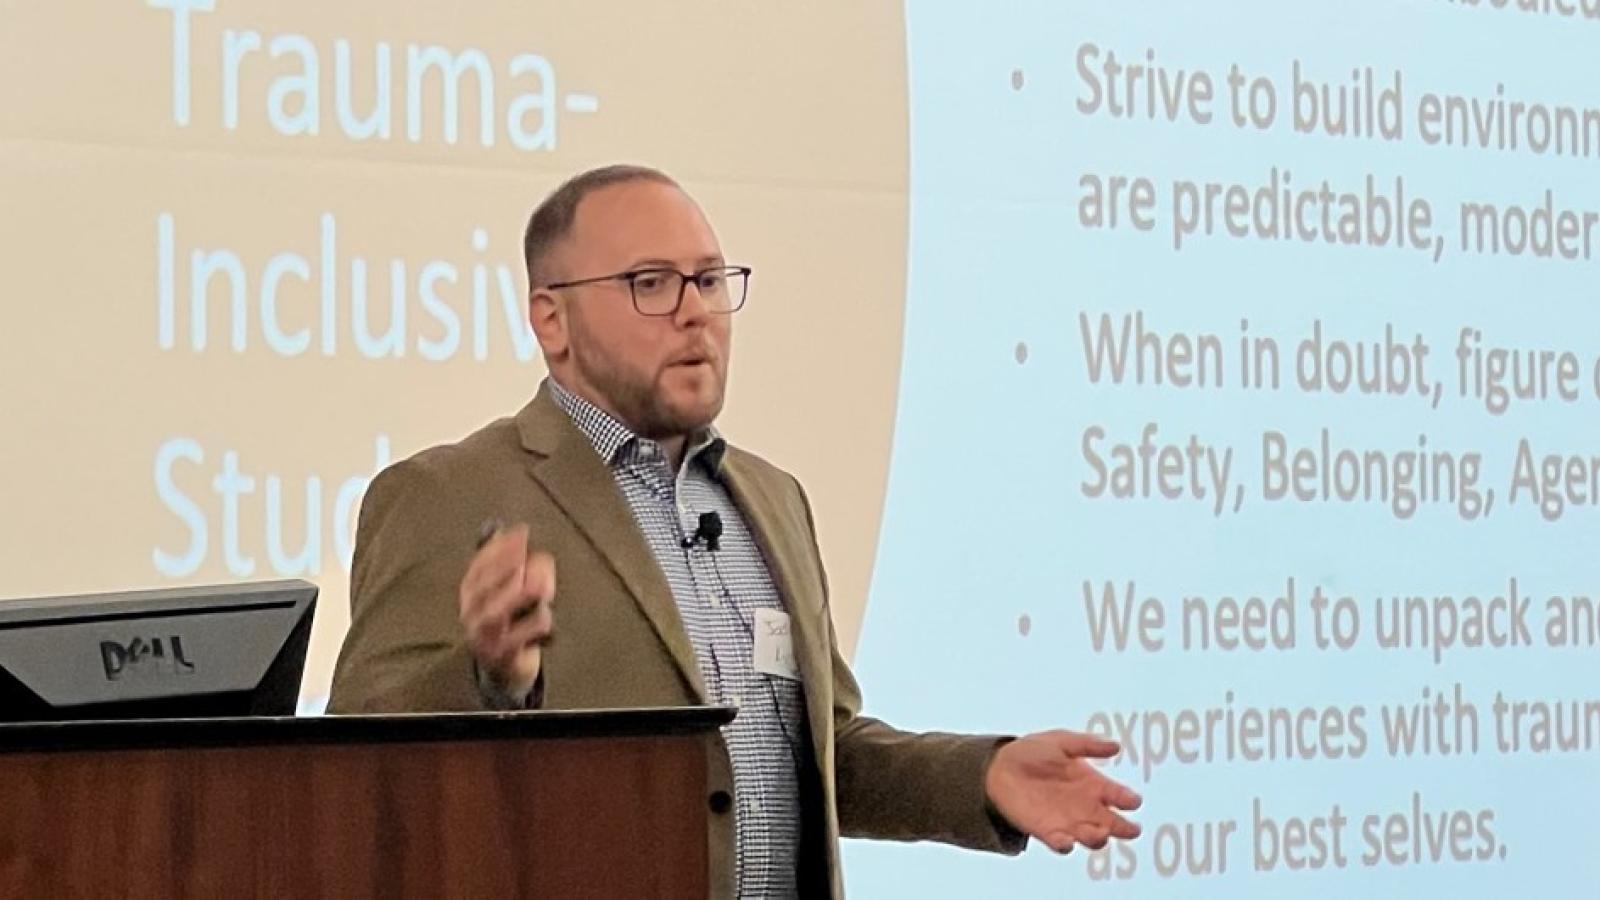 Assistant Professor of Higher Education Jason Lynch of Appalachian State University in North Carolina presents “Working Toward Trauma-Inclusive Campus Environments” at Cal State Long Beach Oct. 14. Dr. Lynch is regarded as an innovative thought leader in college student affairs.